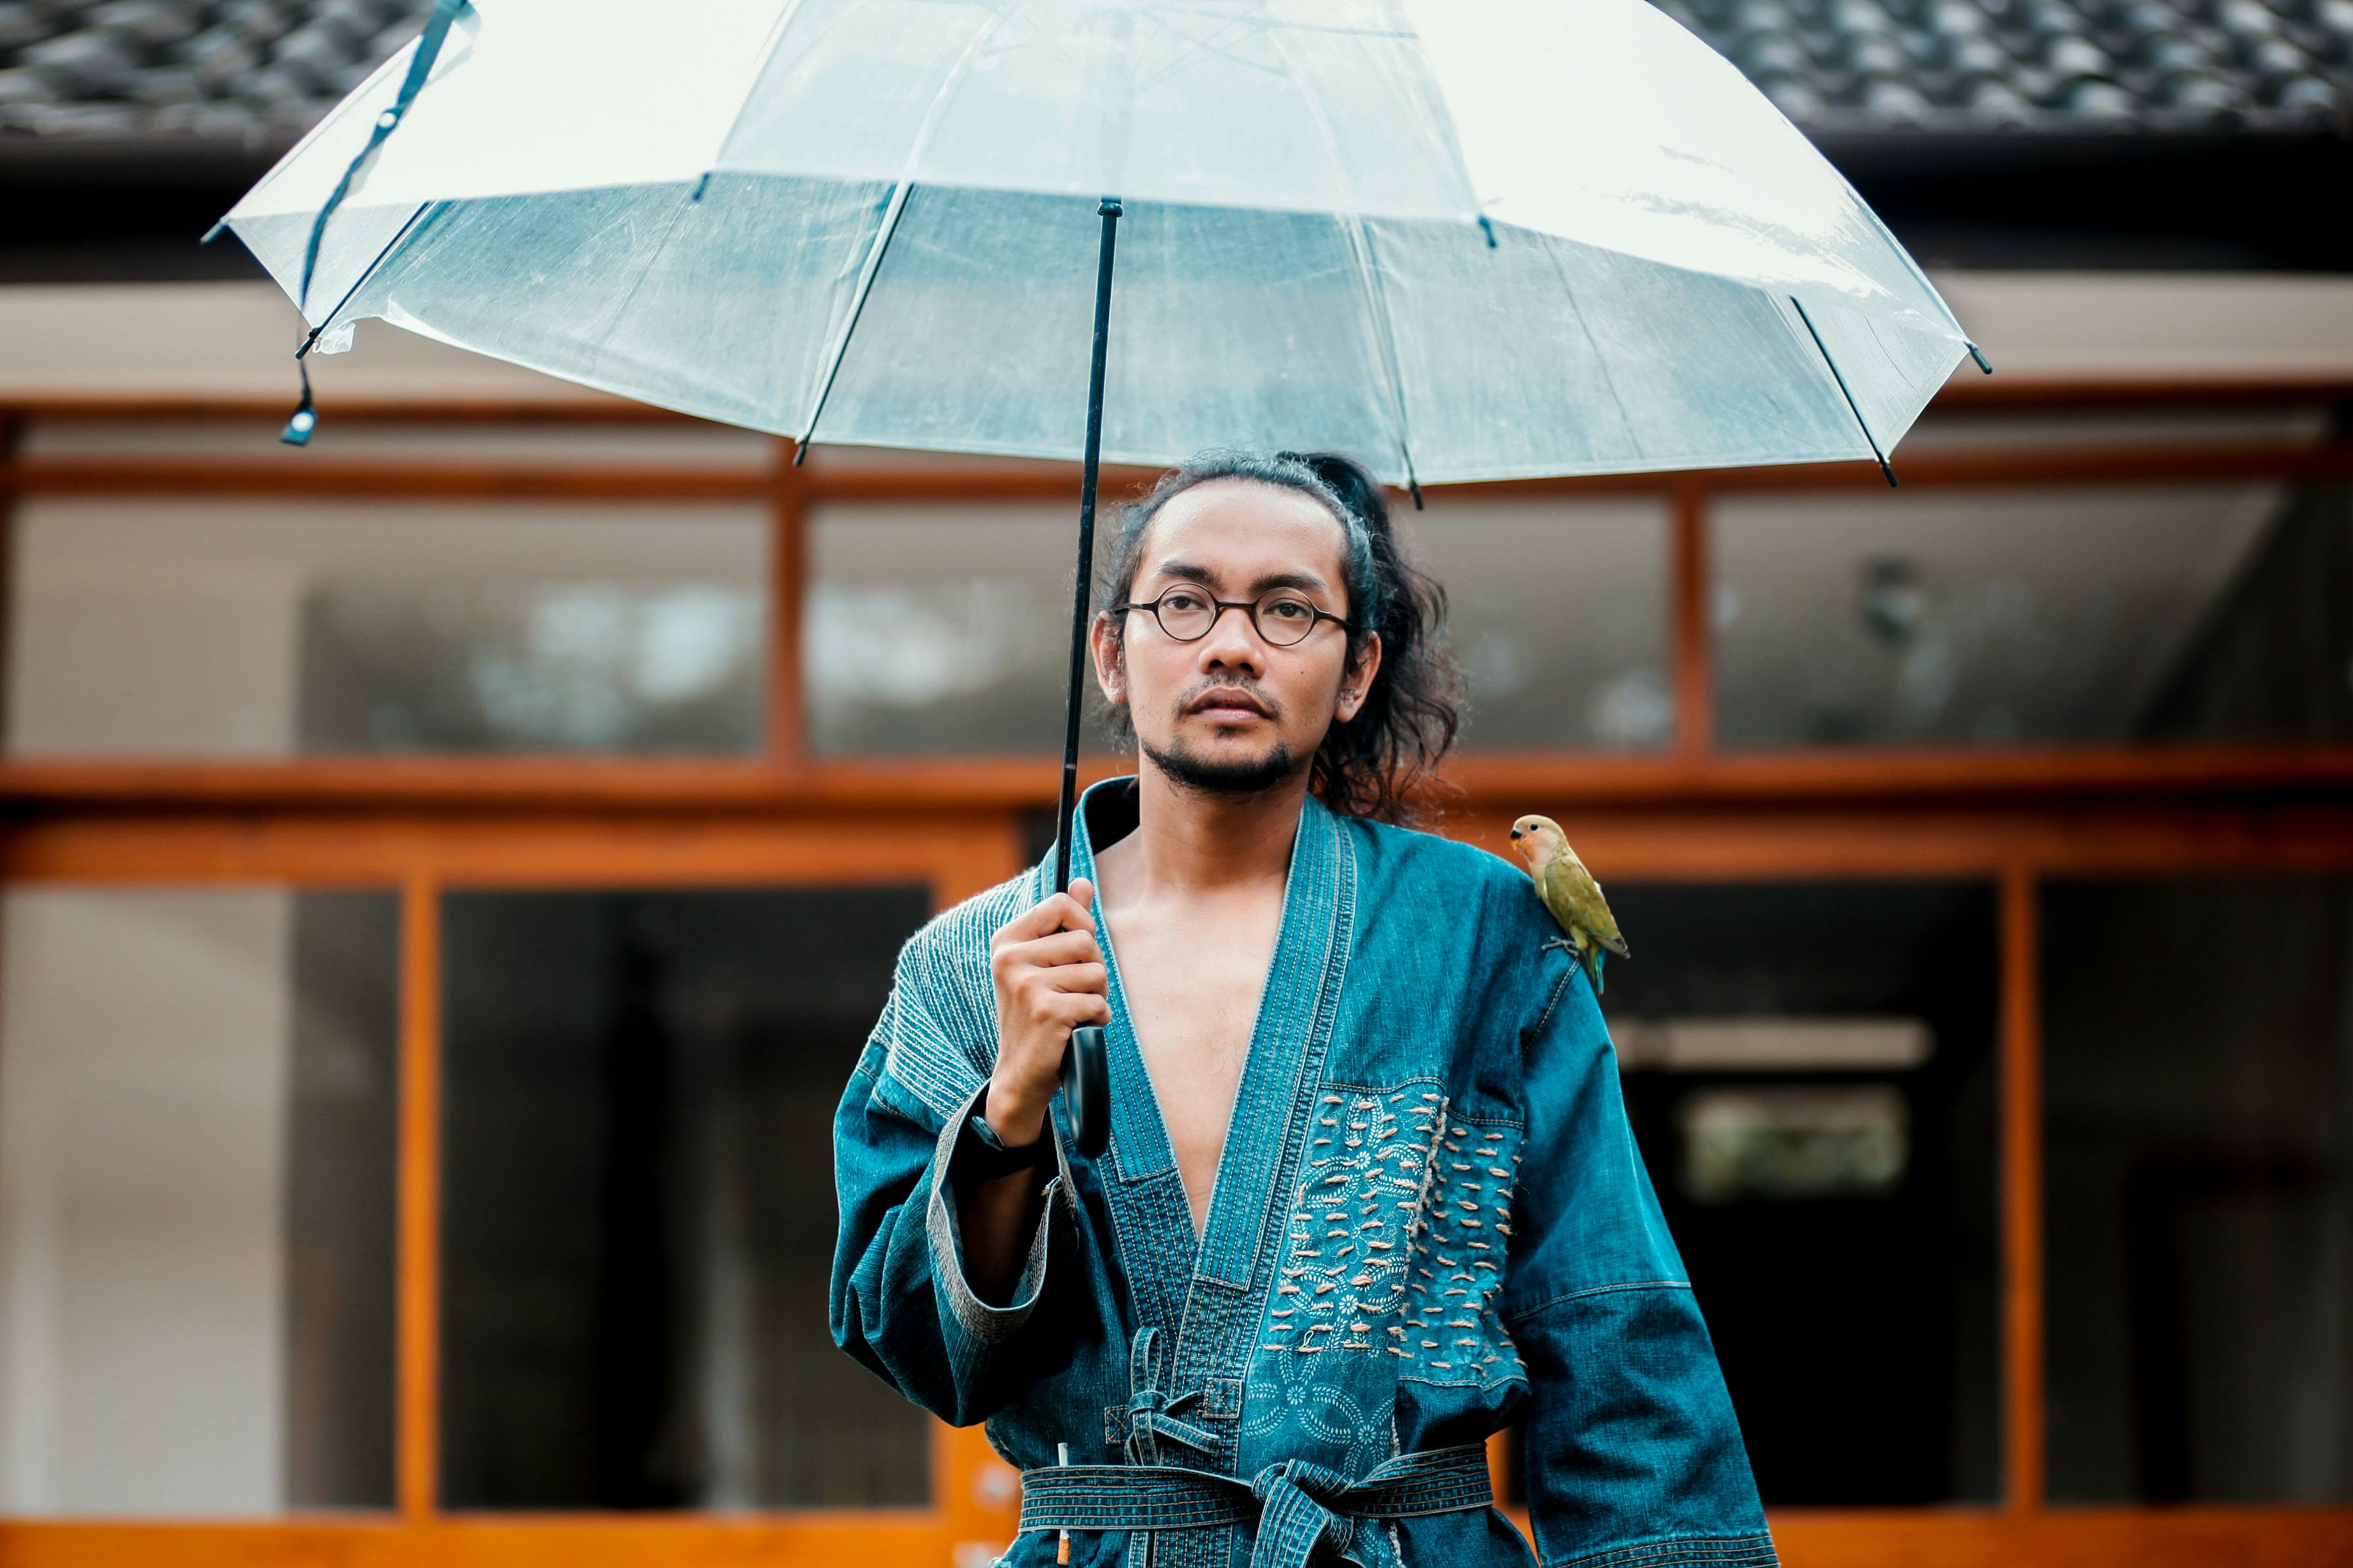 A Japanese man in traditional dress stands under an umbrella in the rain